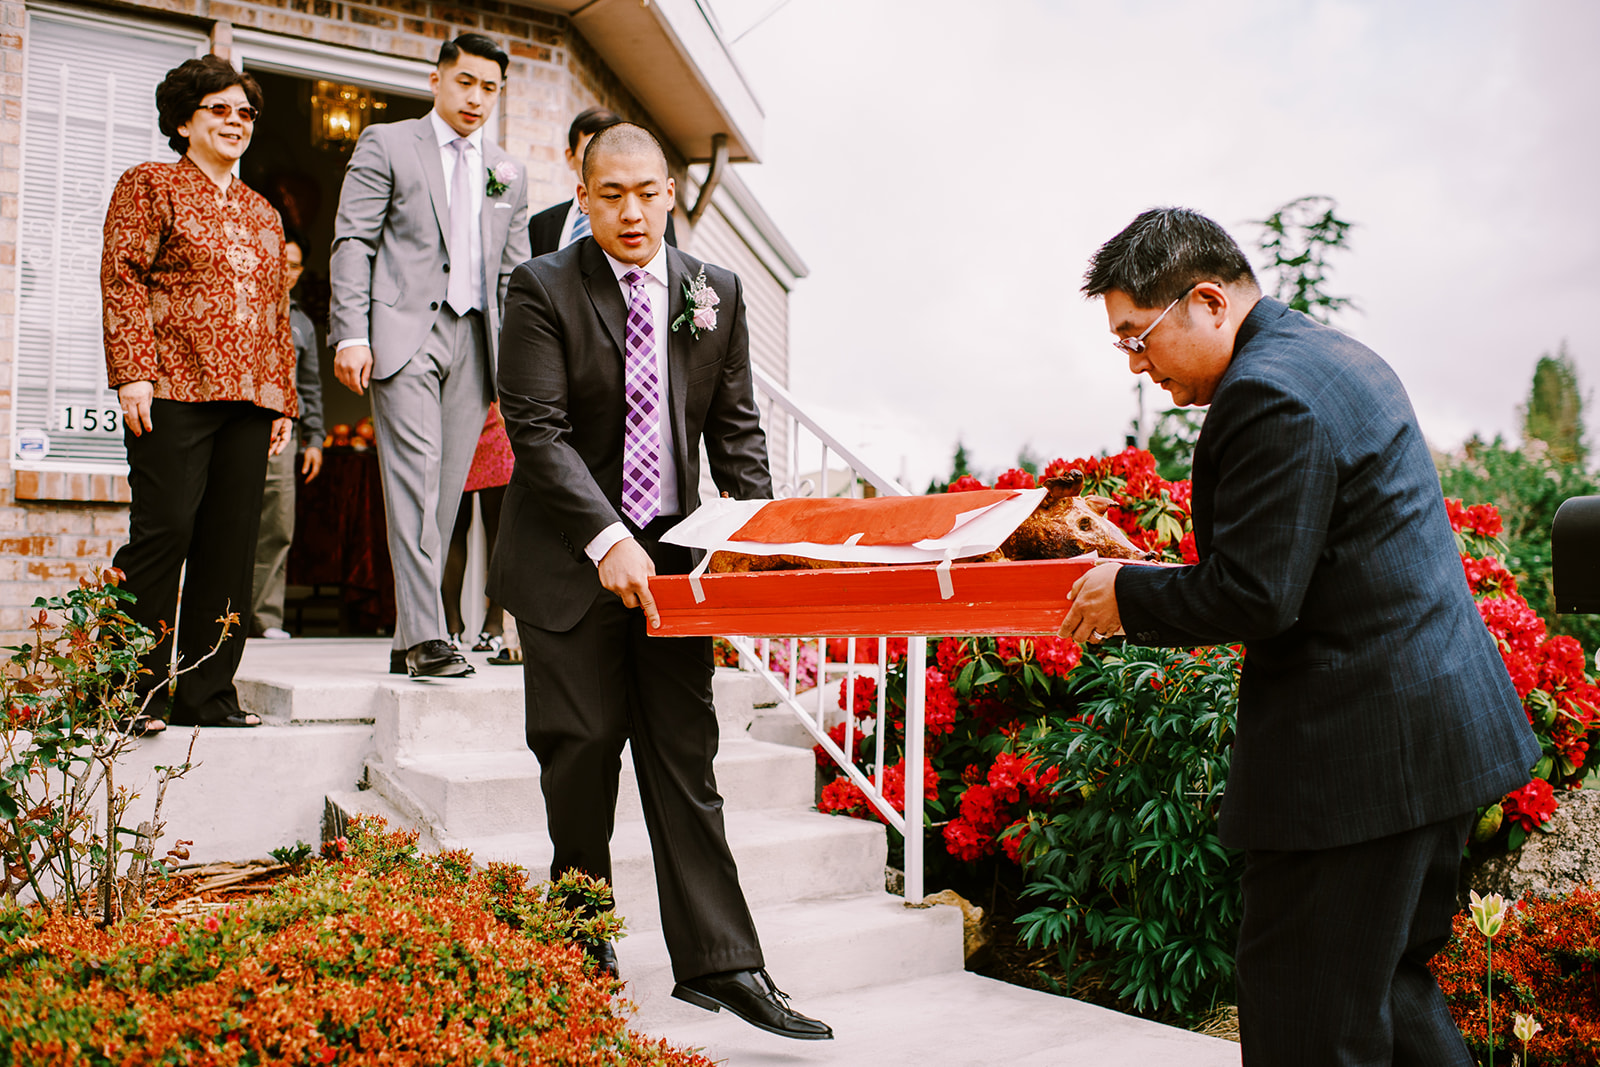 The ceremonial roasted pig for Chinese tea ceremony wedding